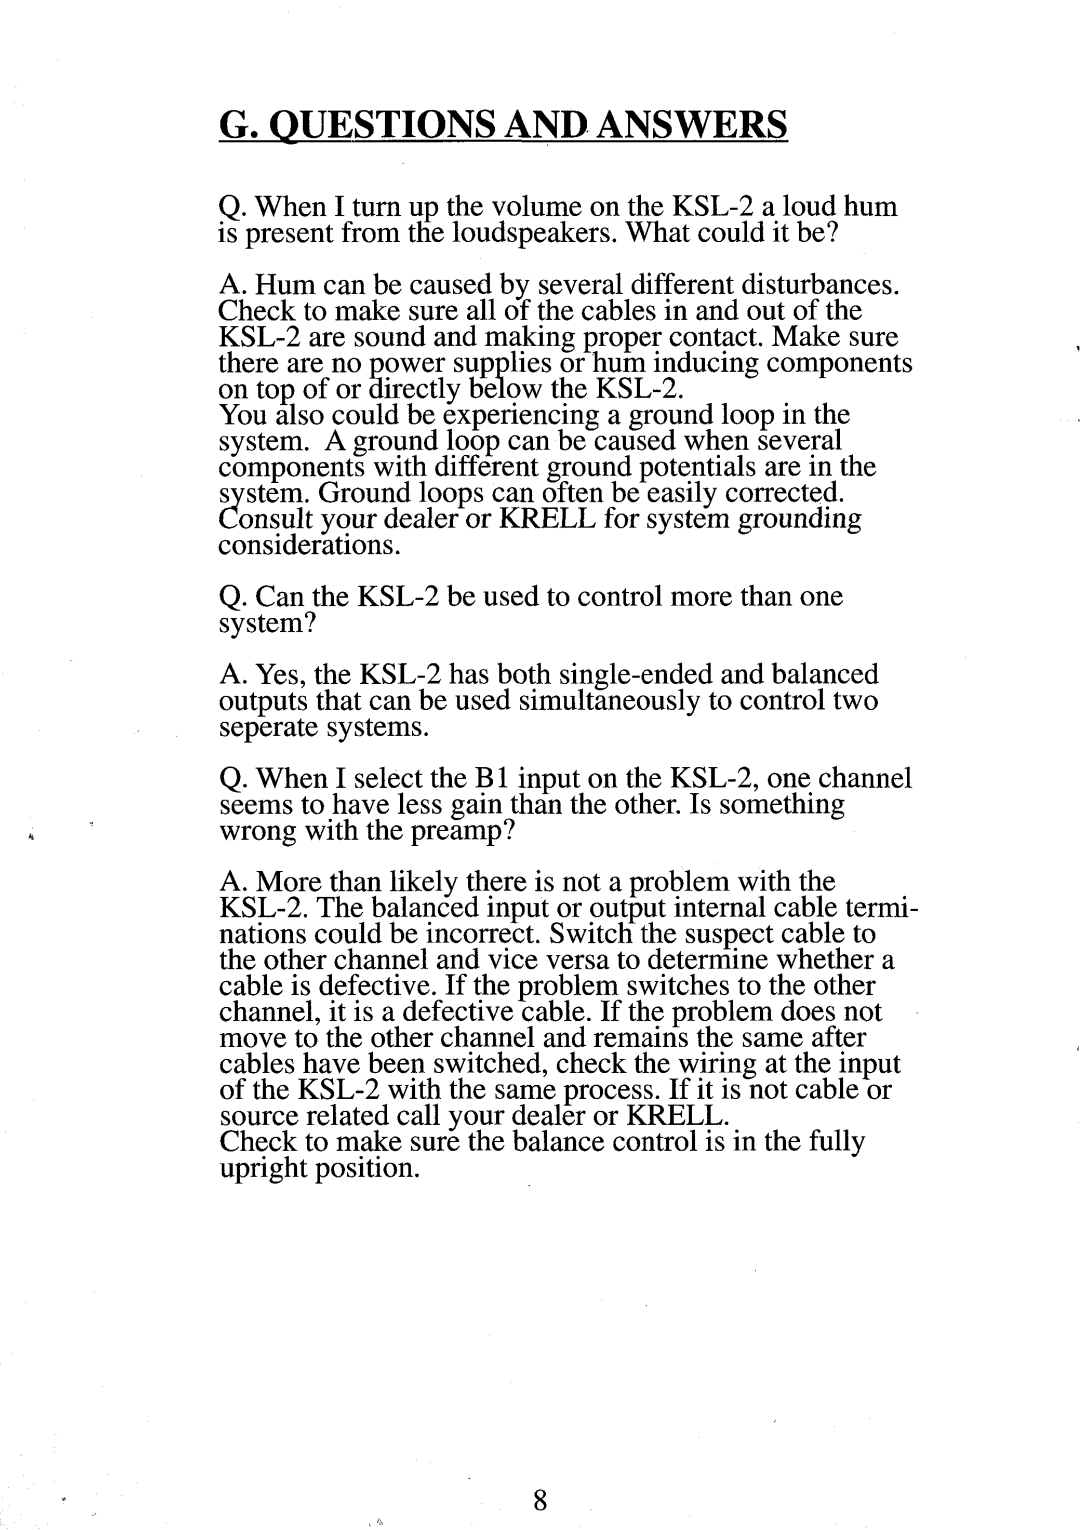 Krell Industries kSL-2 manual G. Questions And Answers 